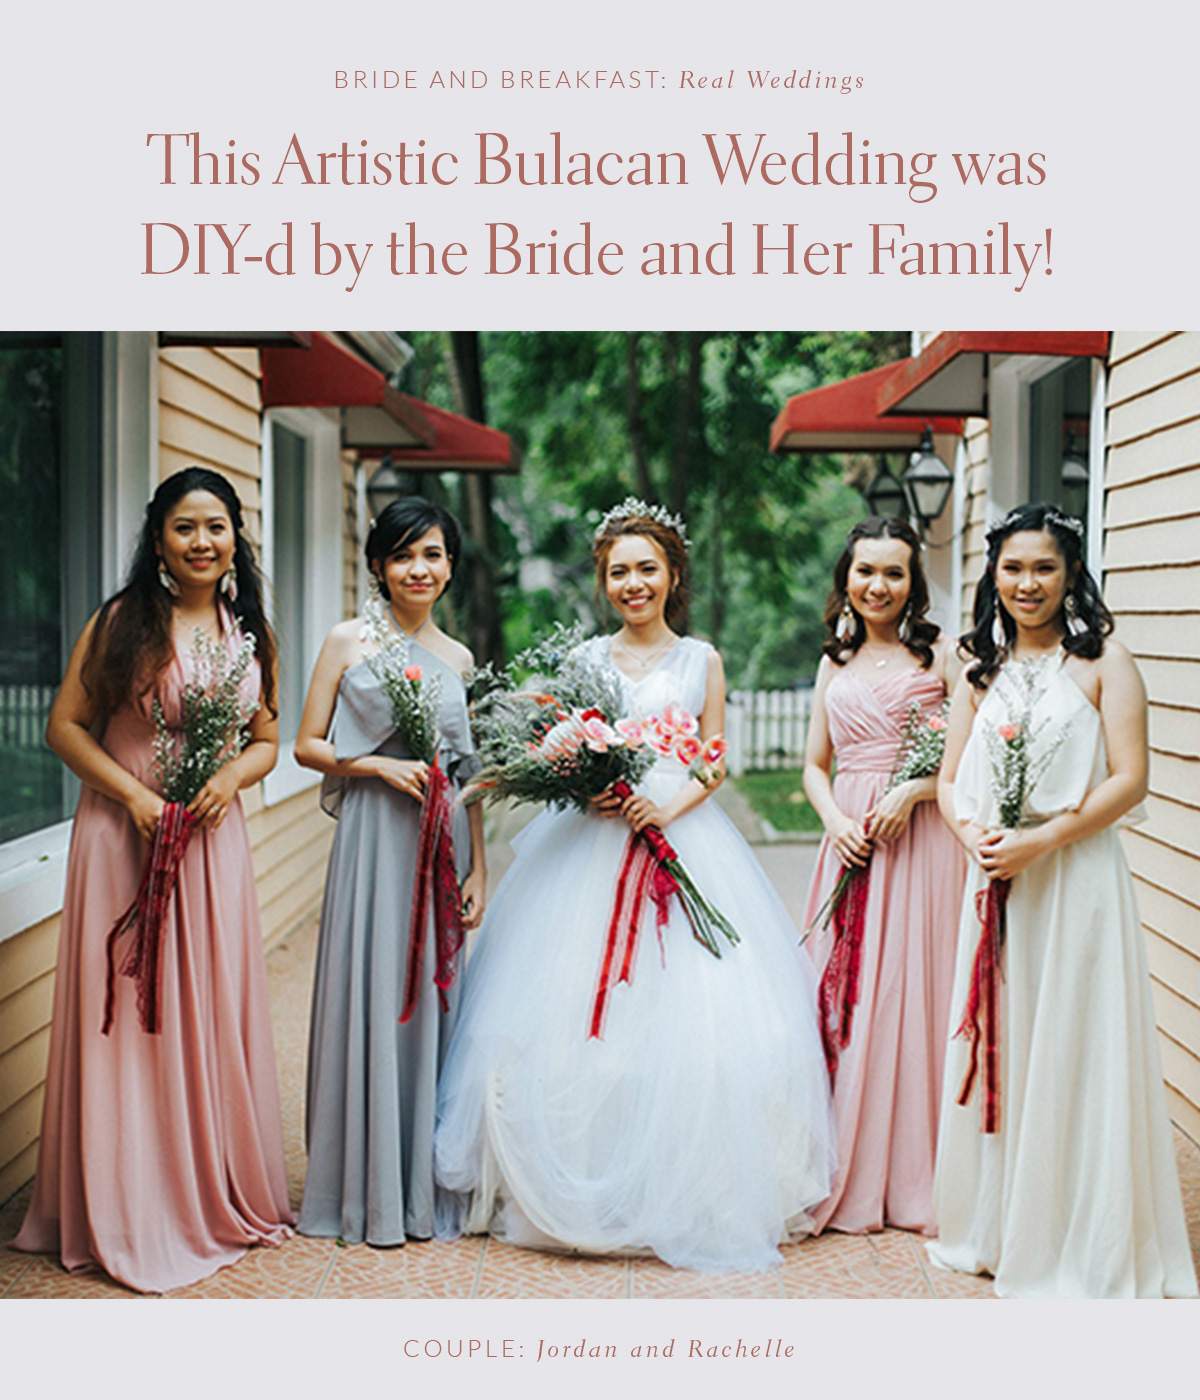 This Artistic Bulacan Wedding was DIY-d by the Bride and Her Family!